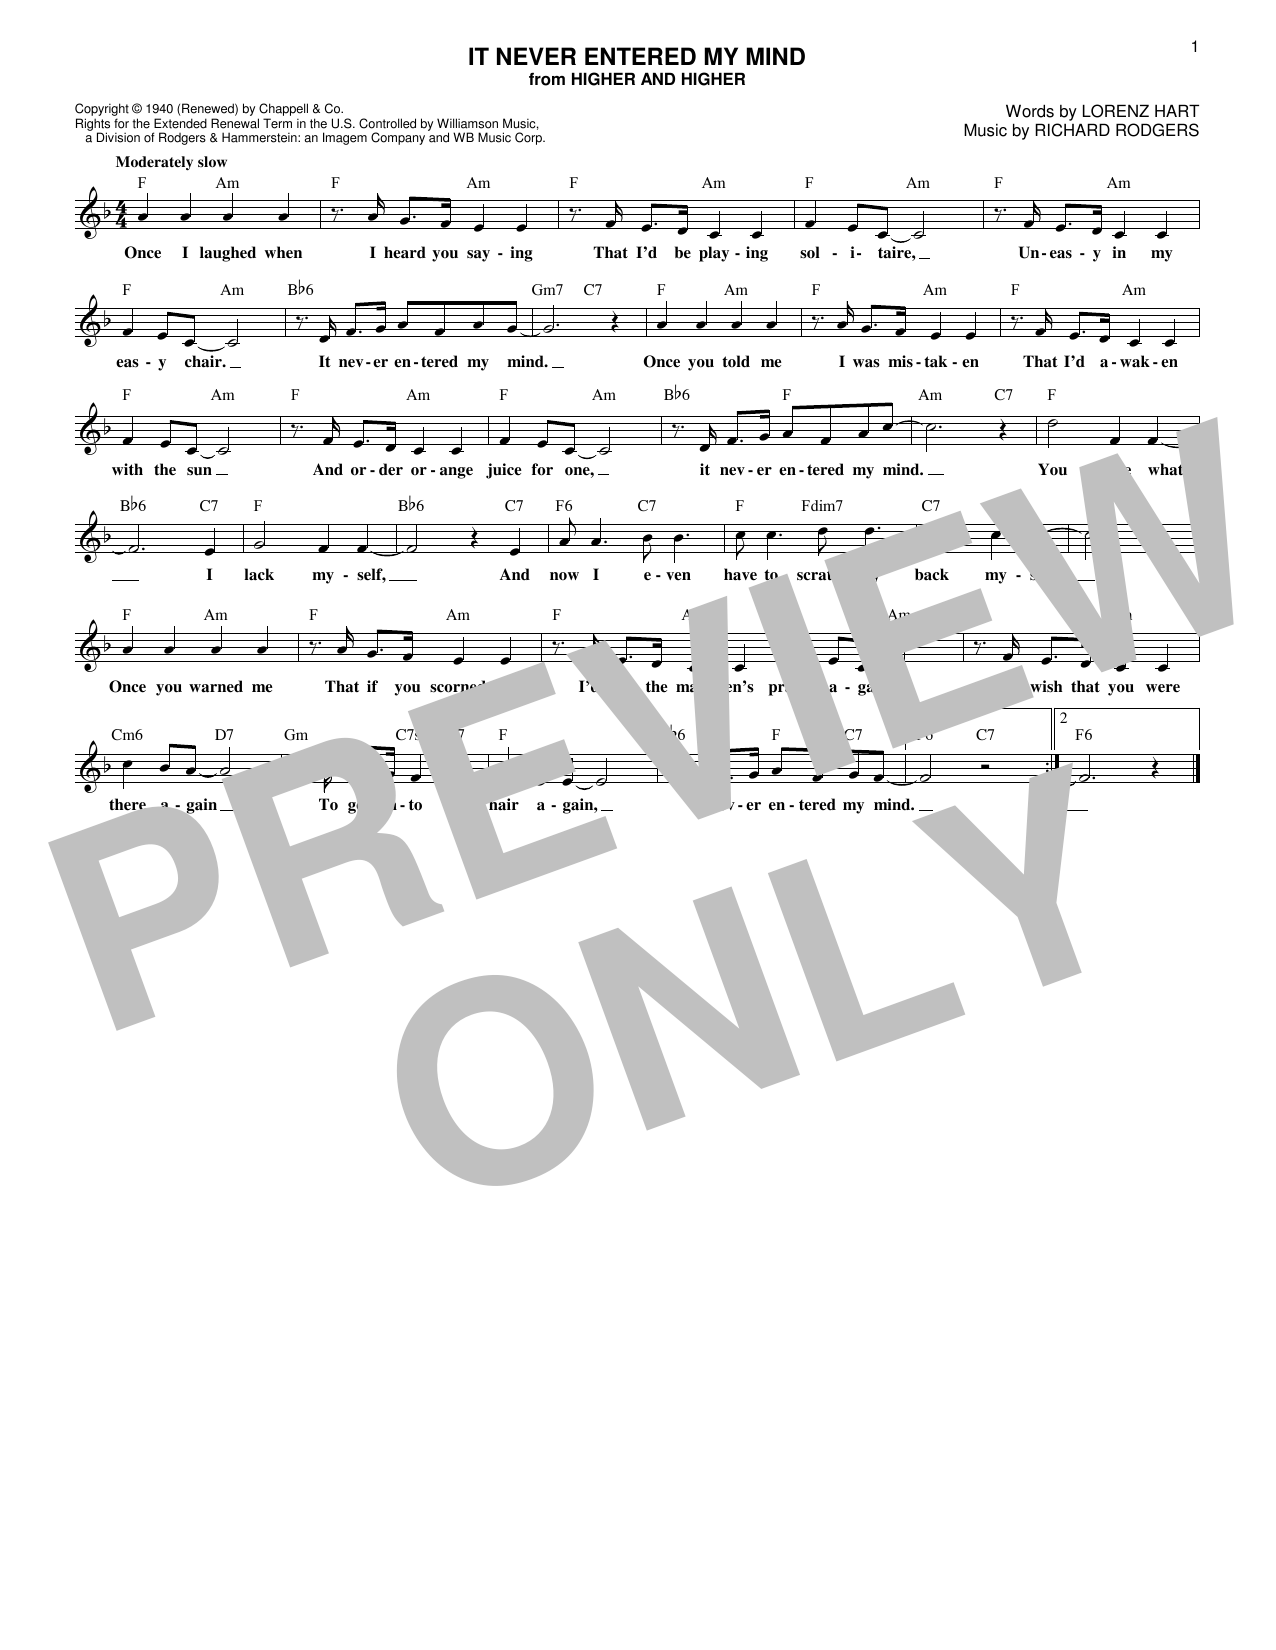 Download Rodgers & Hart It Never Entered My Mind Sheet Music